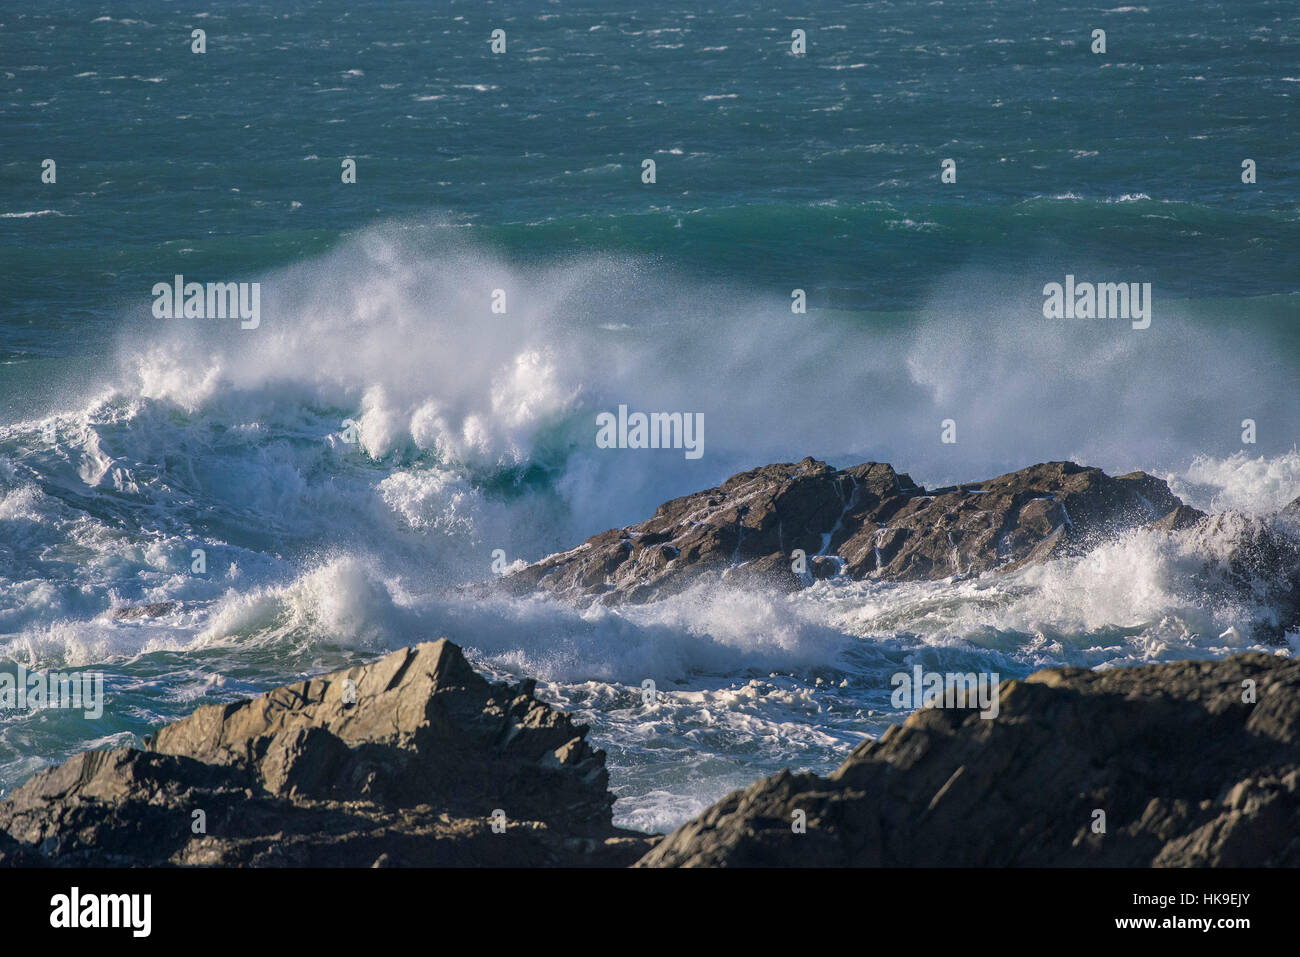 High winds Weather UK spray waves sea Rocks Fistral Newquay Cornwall Stock Photo